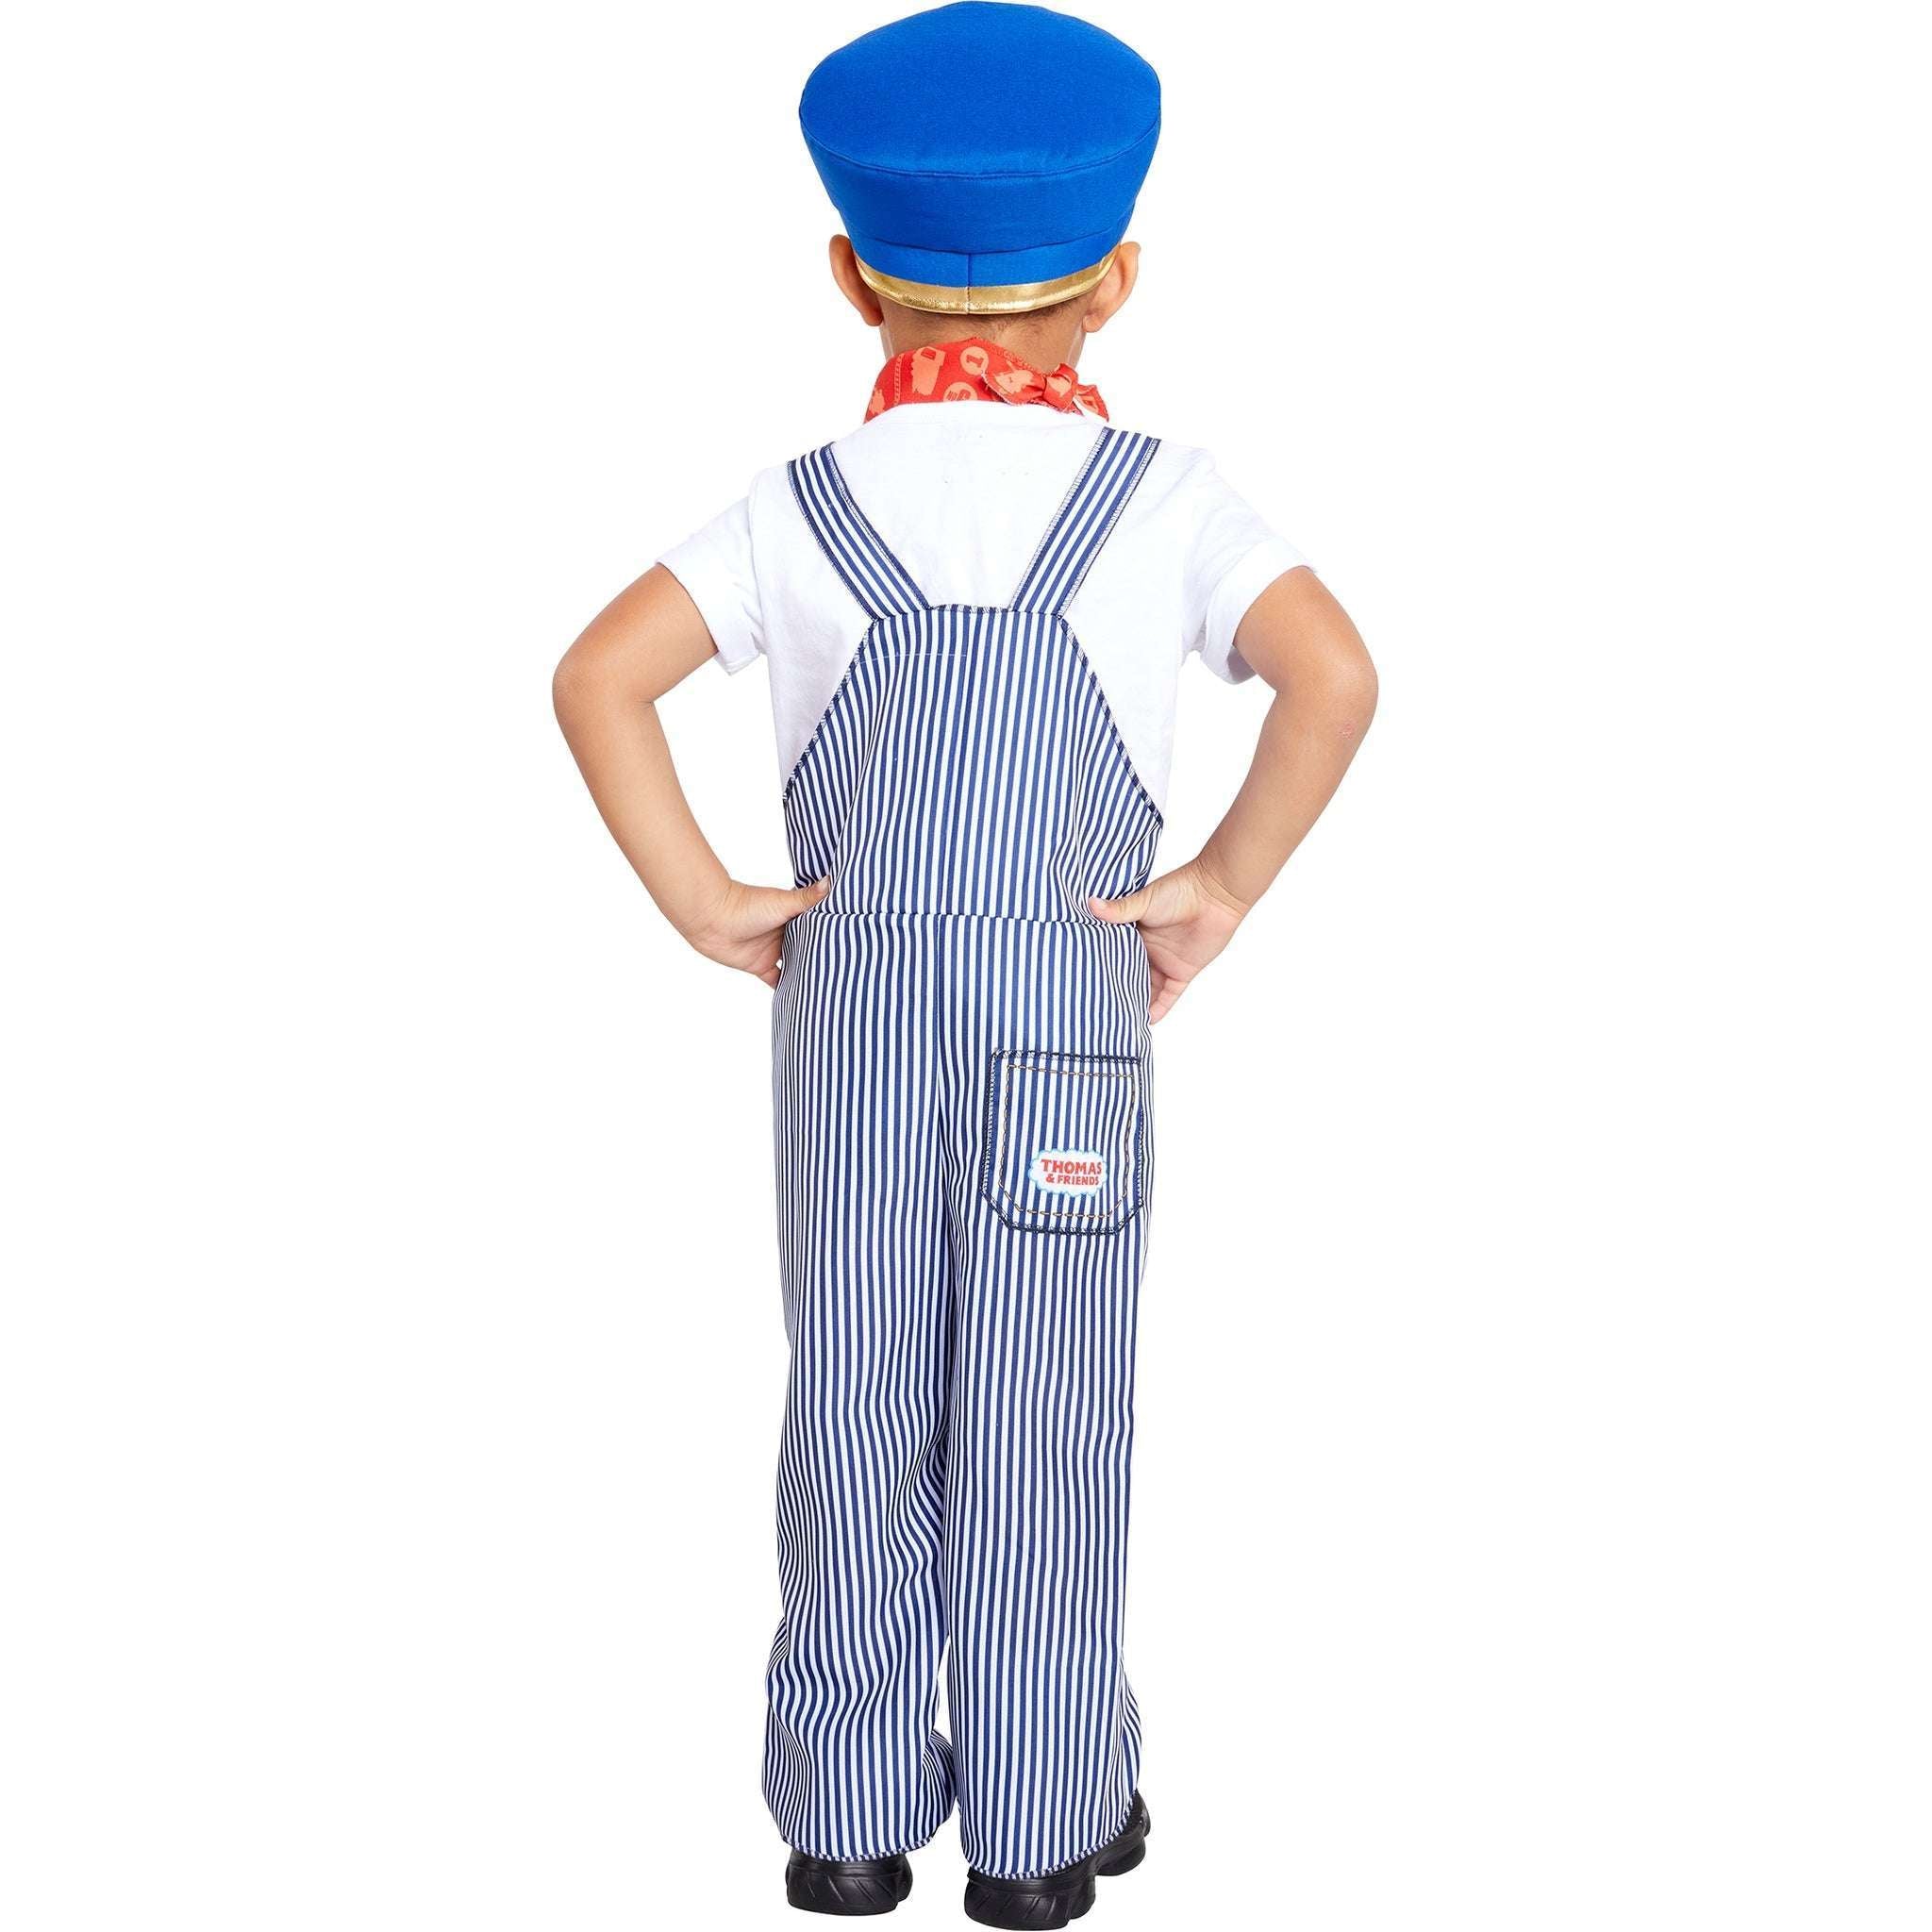 Thomas and Friends Conductor Kid's Costume